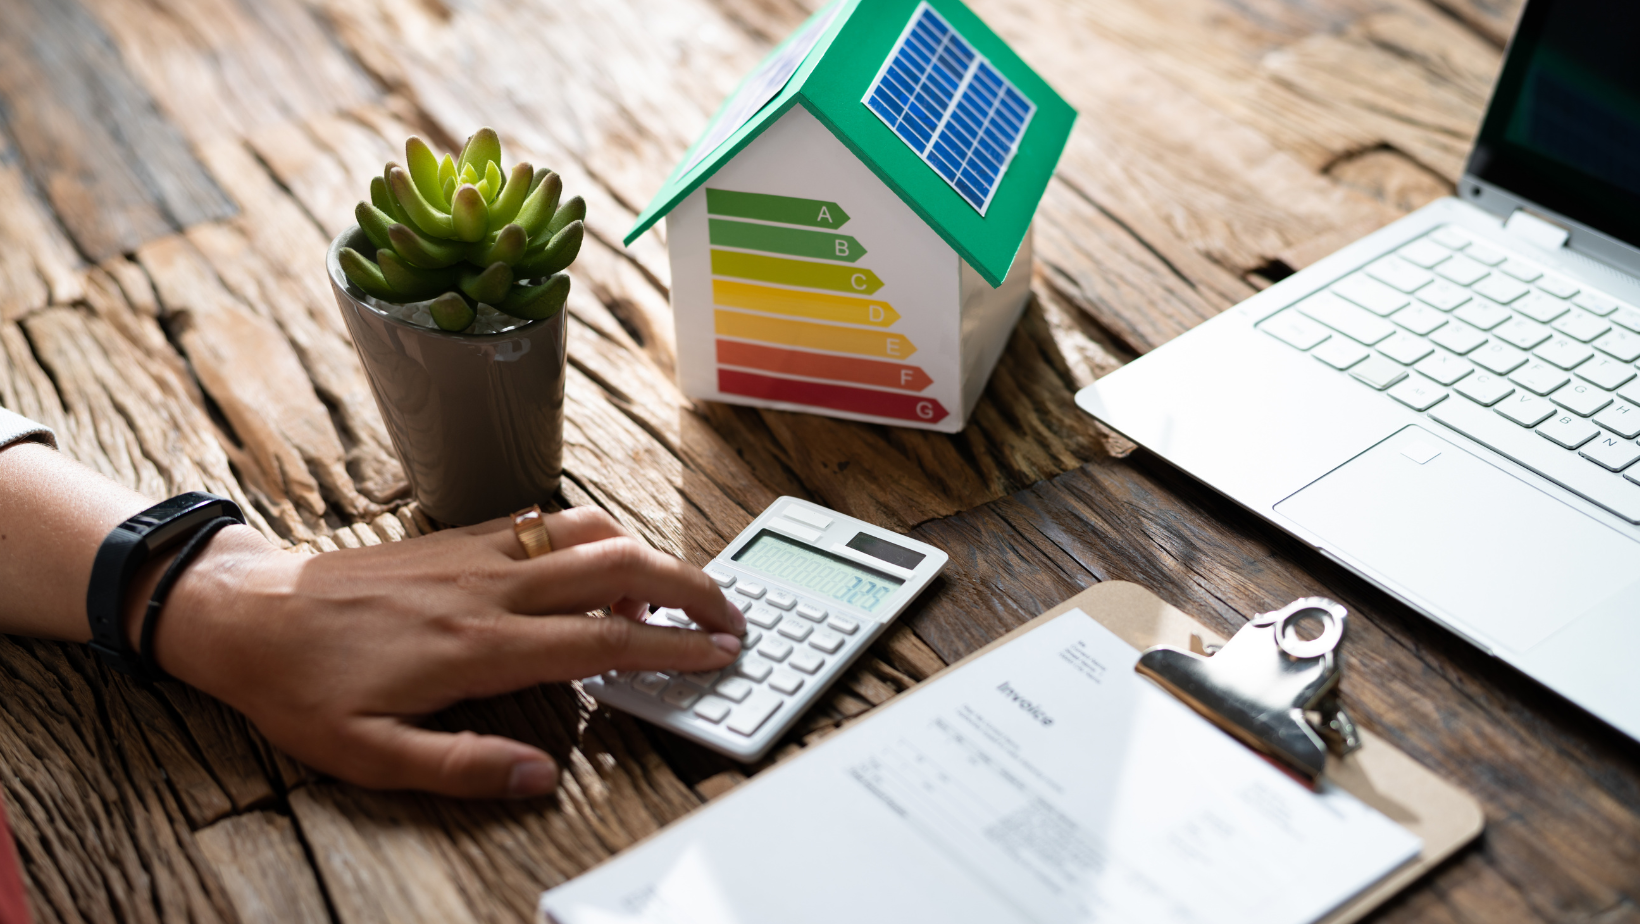 Factors to consider when choosing an energy management system